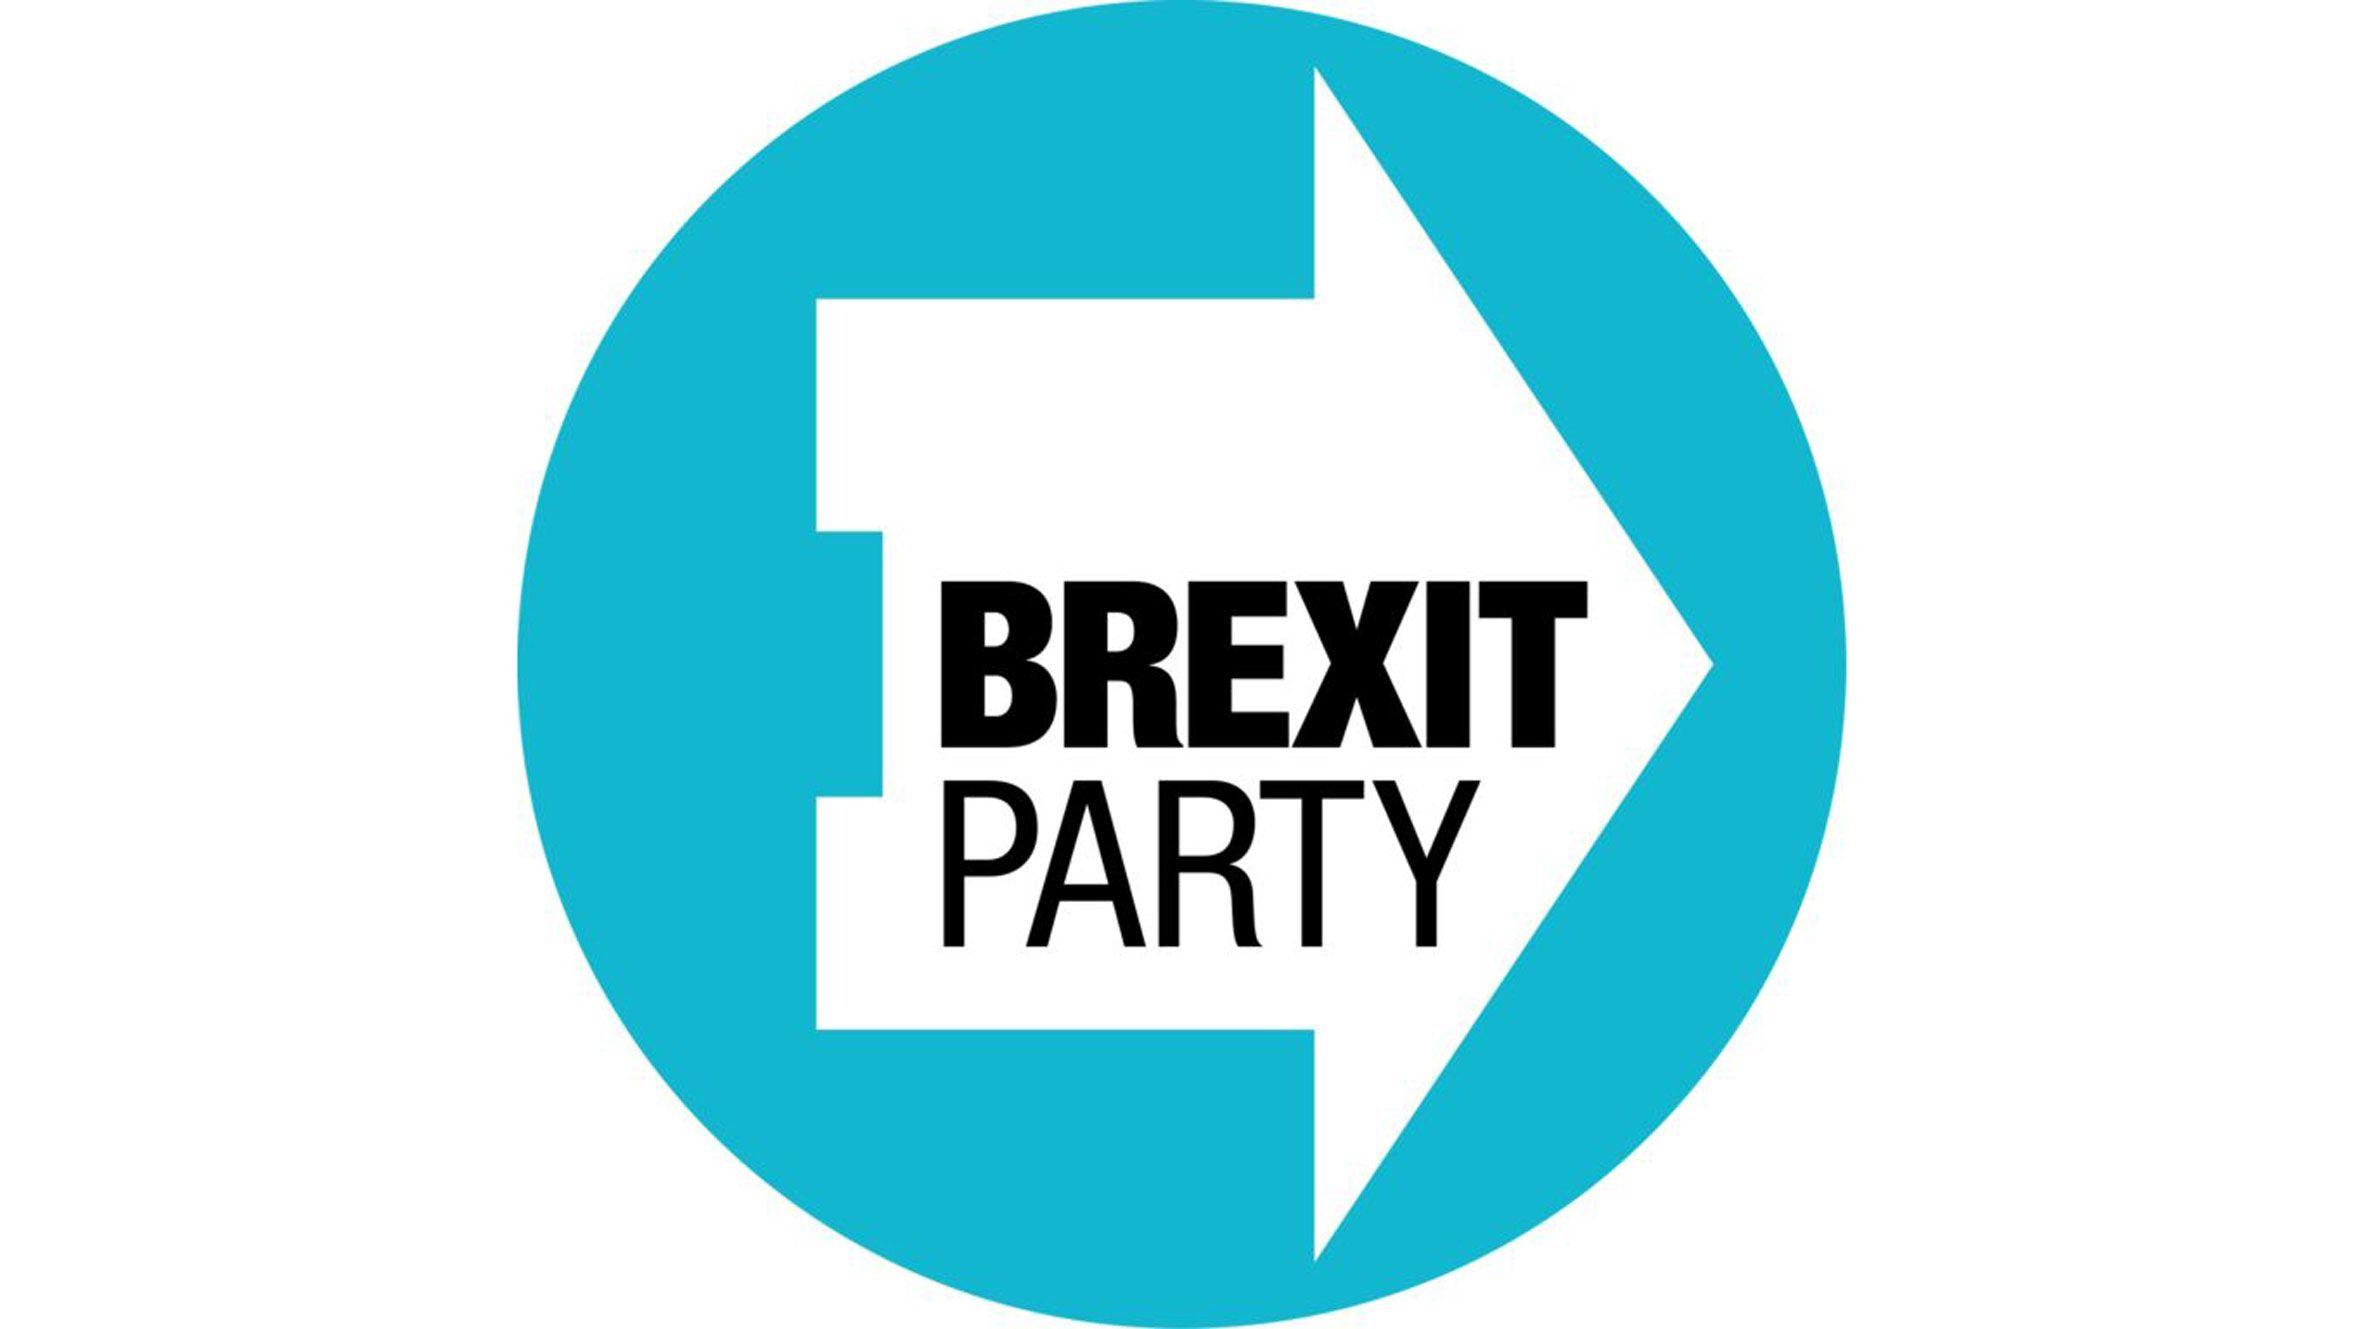 Ukip Logo - Brexit Party logo is very clever graphic design says Ben Terrett